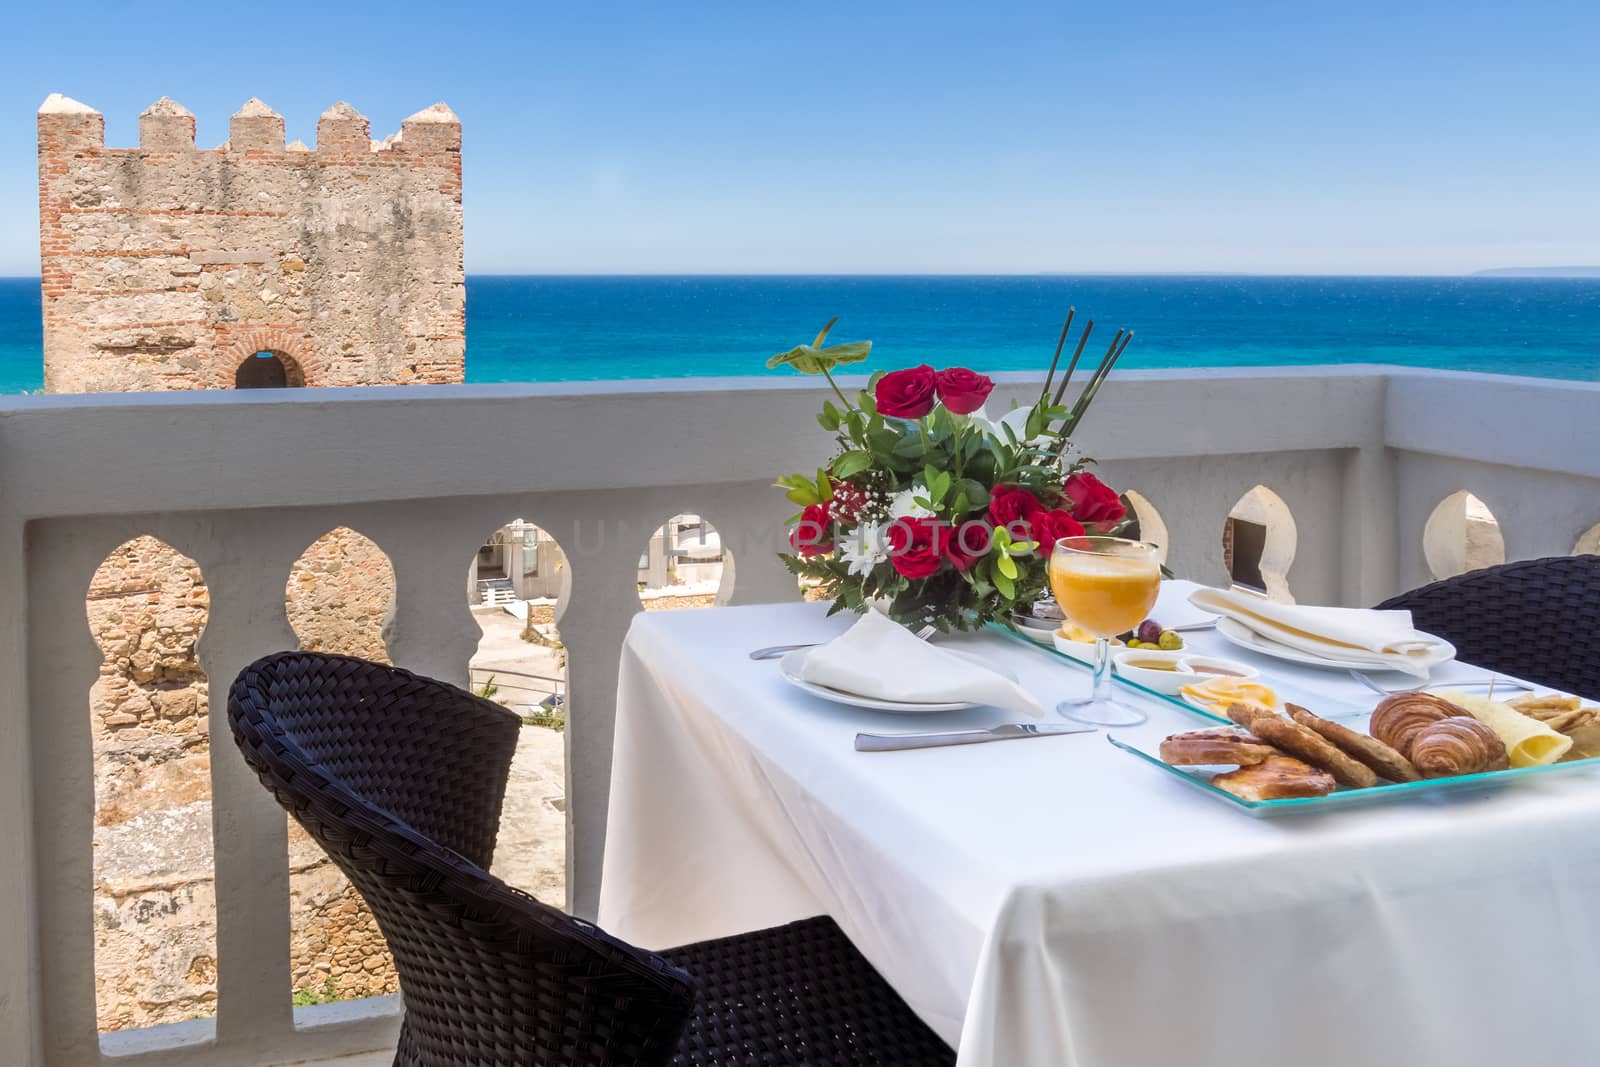 Breakfast on terrace with view on sea